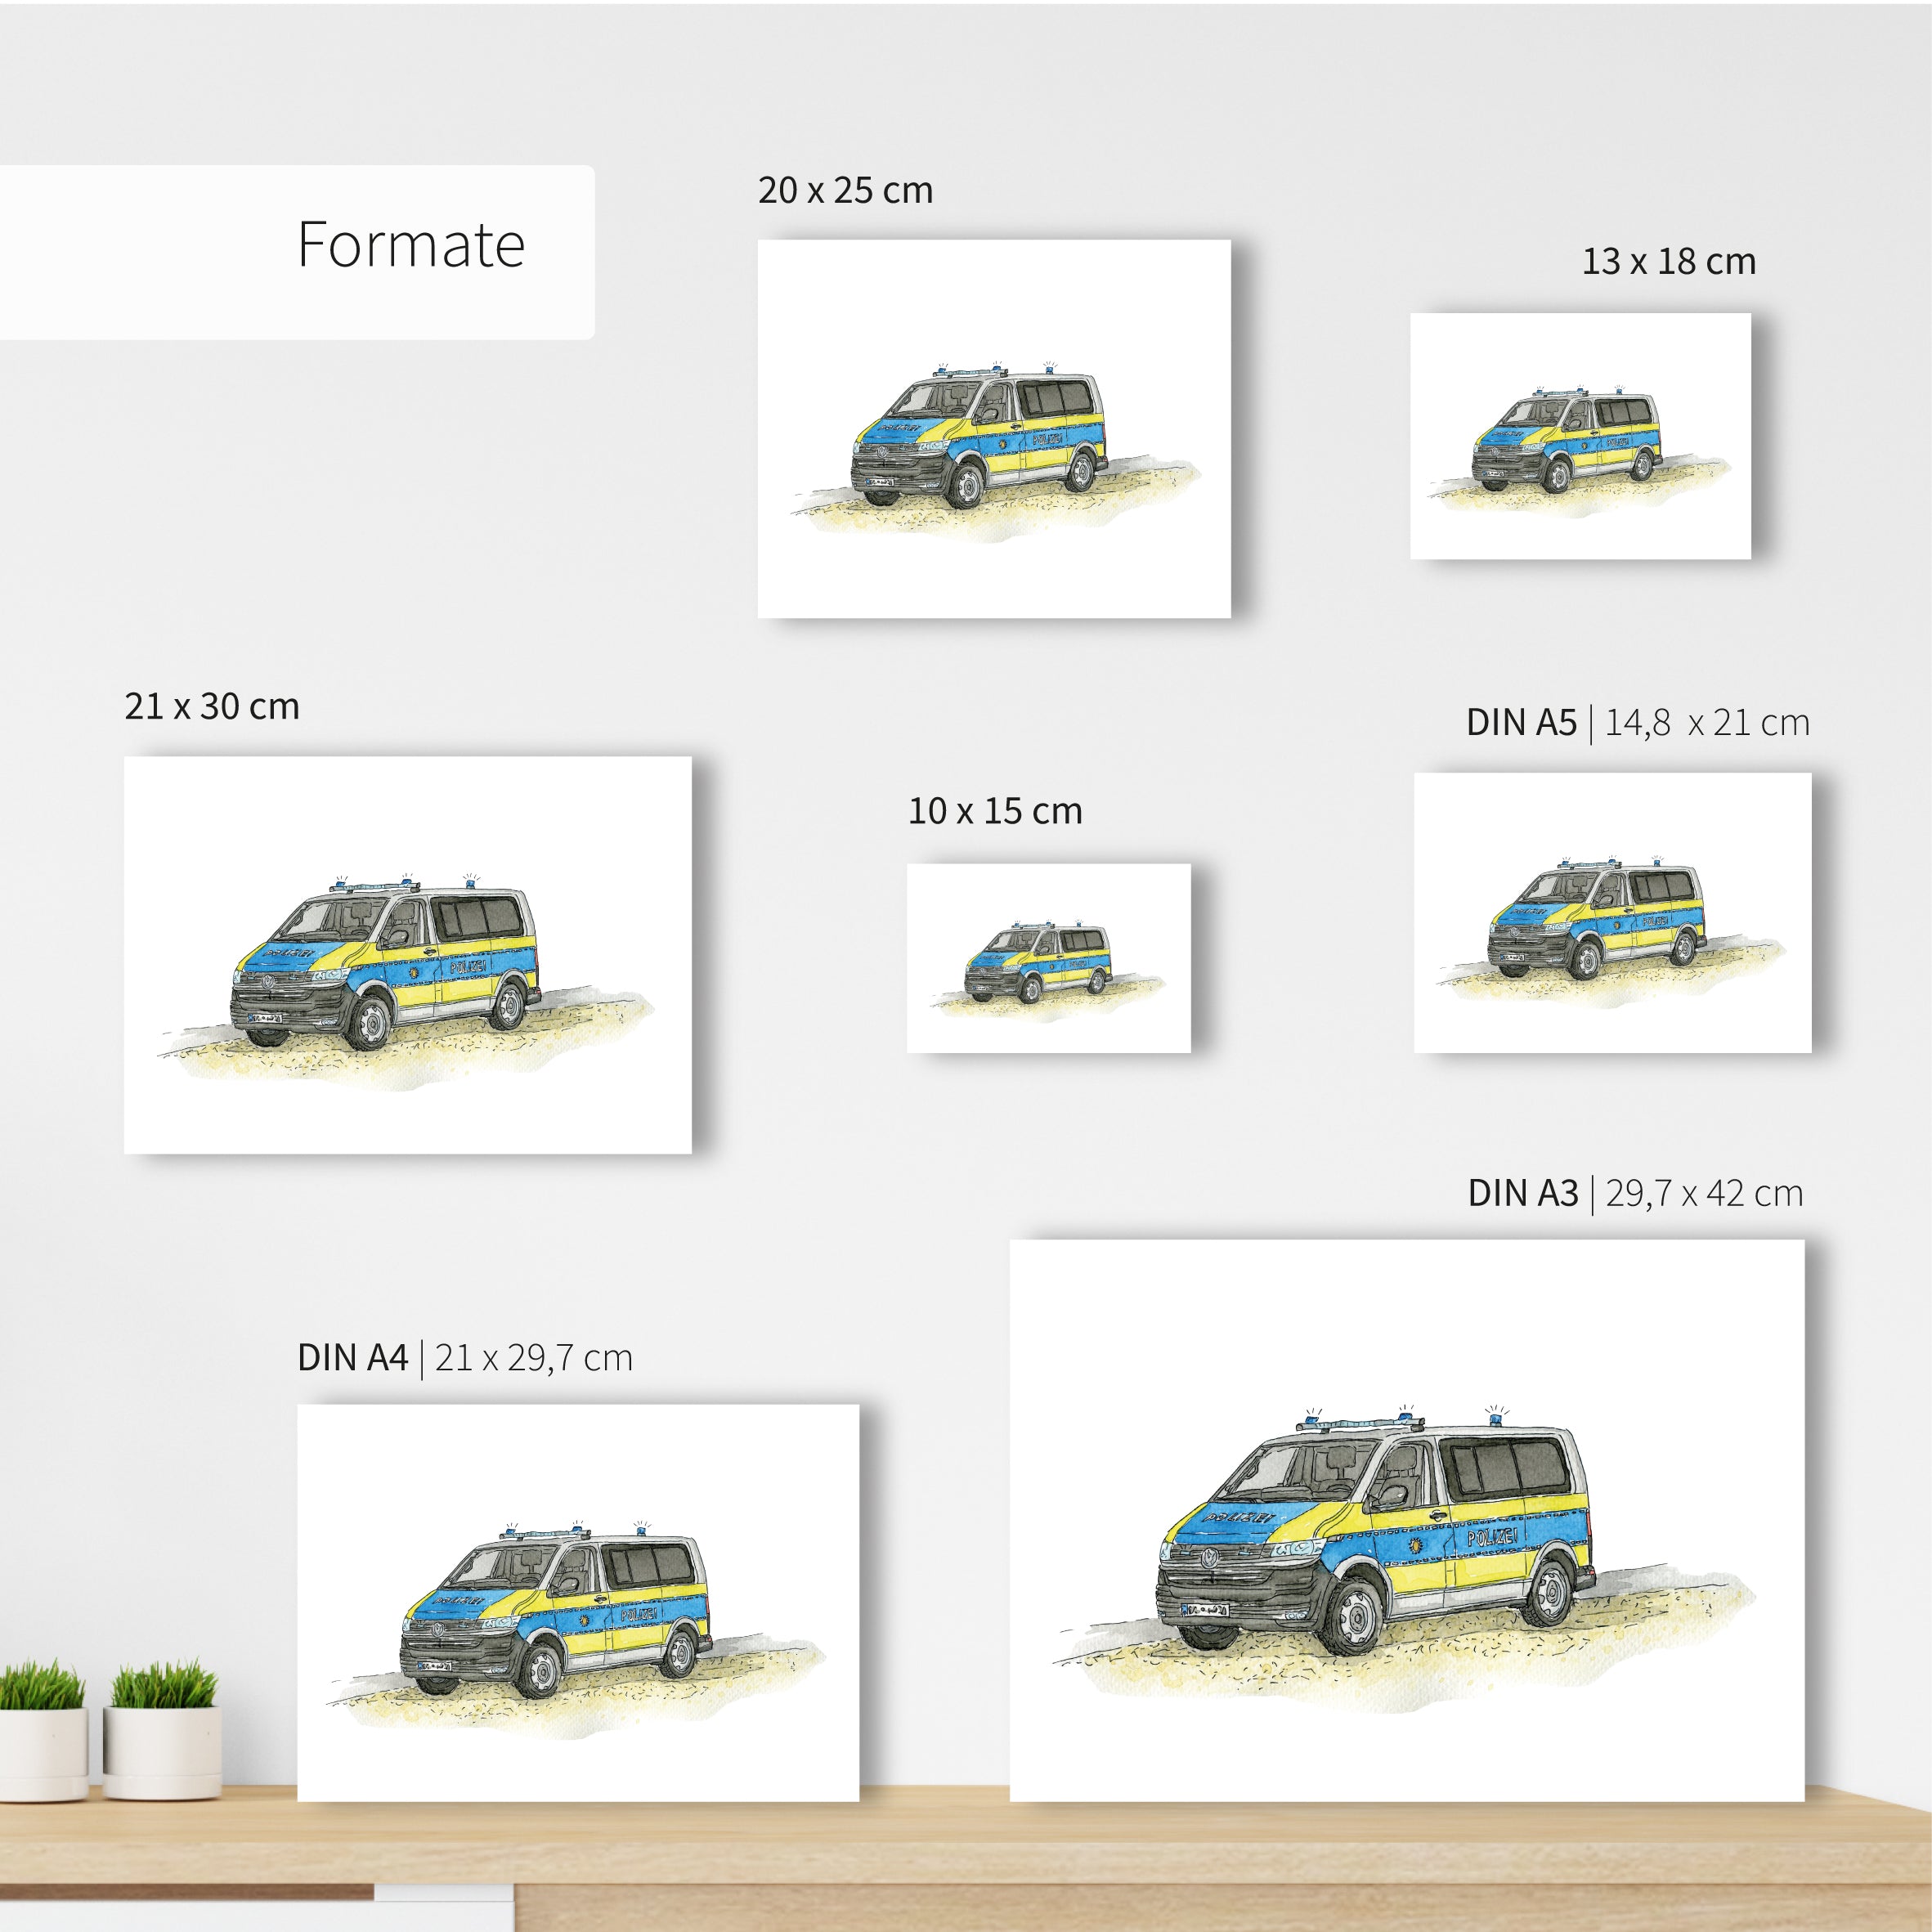 Vehicle Poster - Ambulance | Picture for the children's room | gift idea